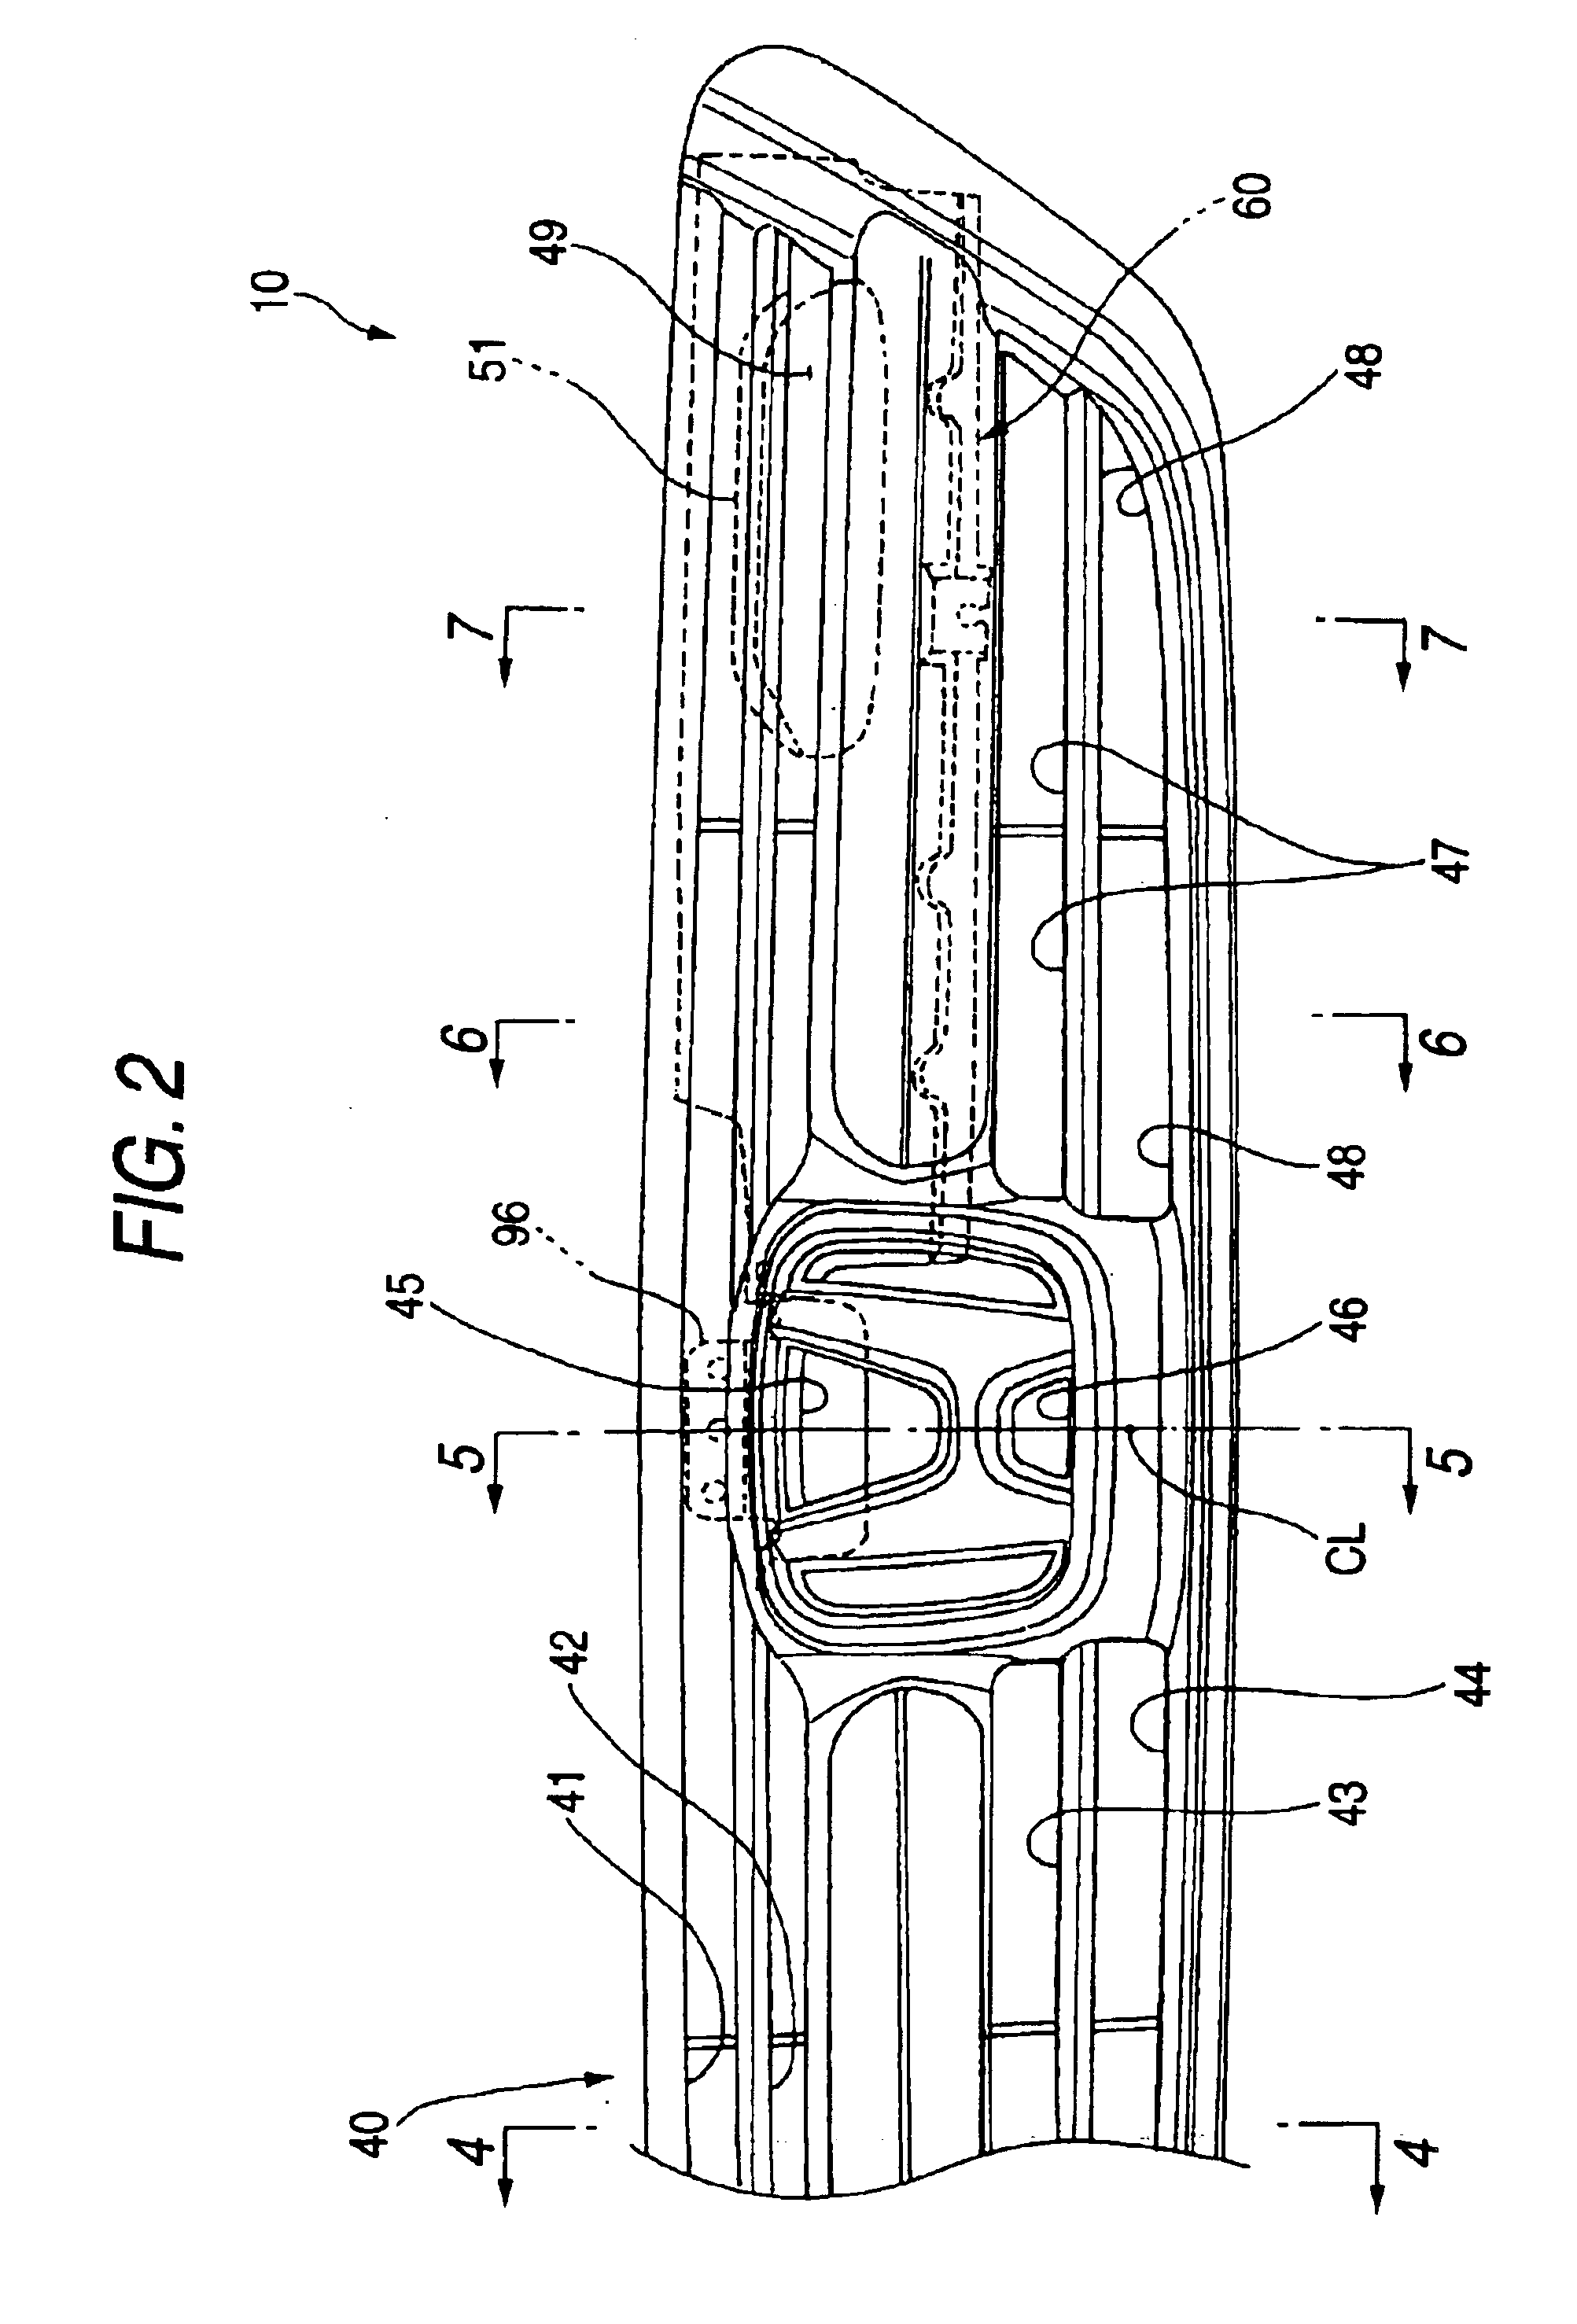 Air-intake structure around front grille for vehicle